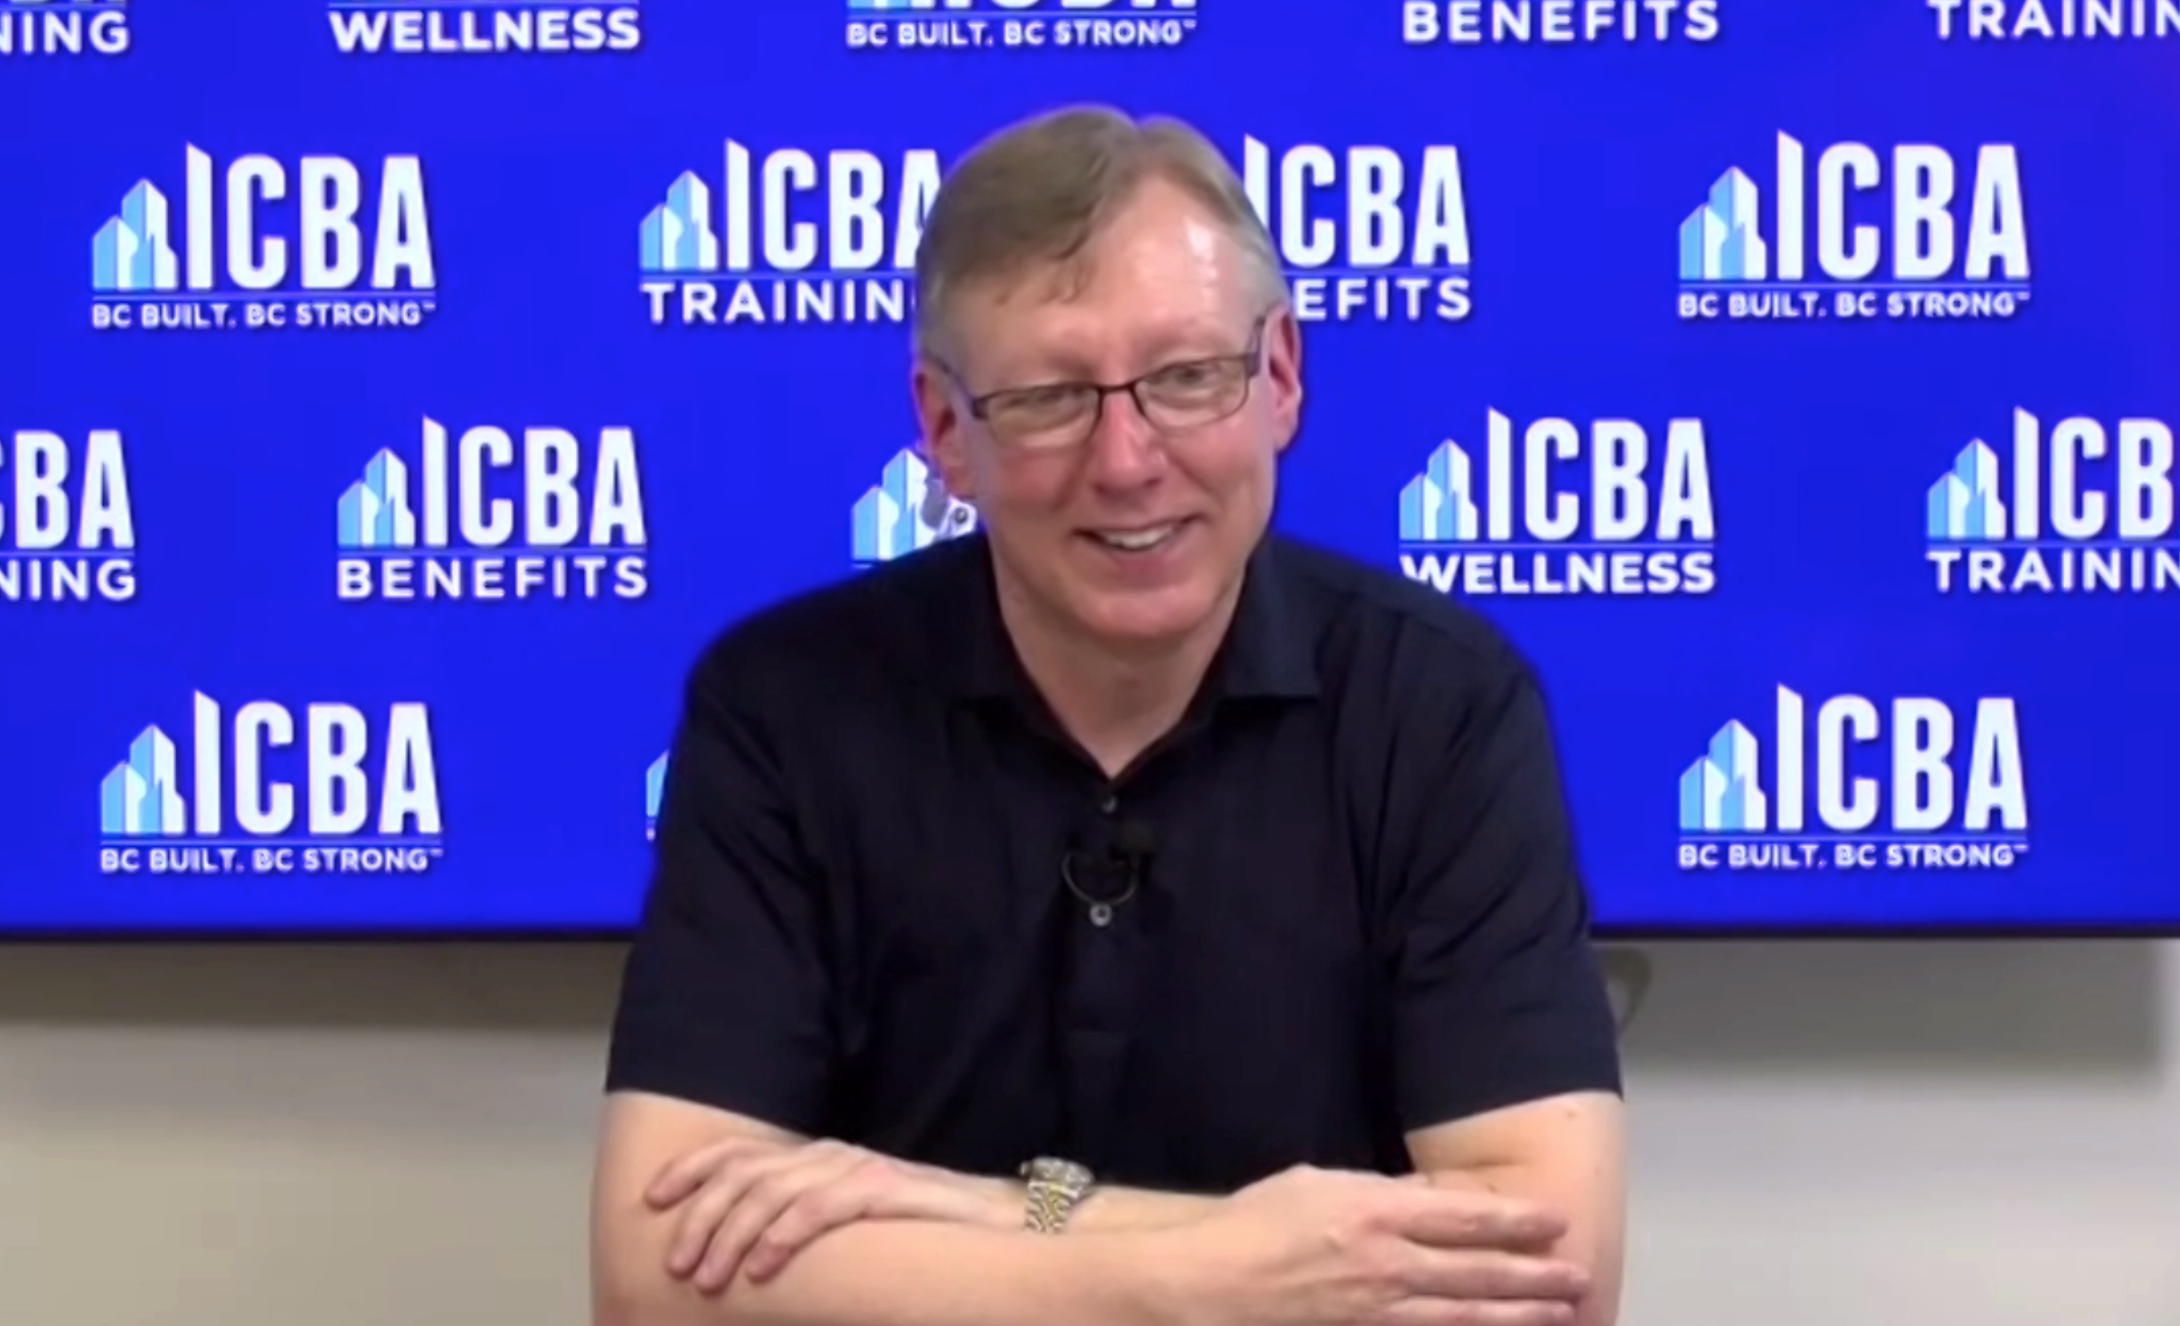 ICBA unveils mental health support program; ICBA president on his personal story and commitment